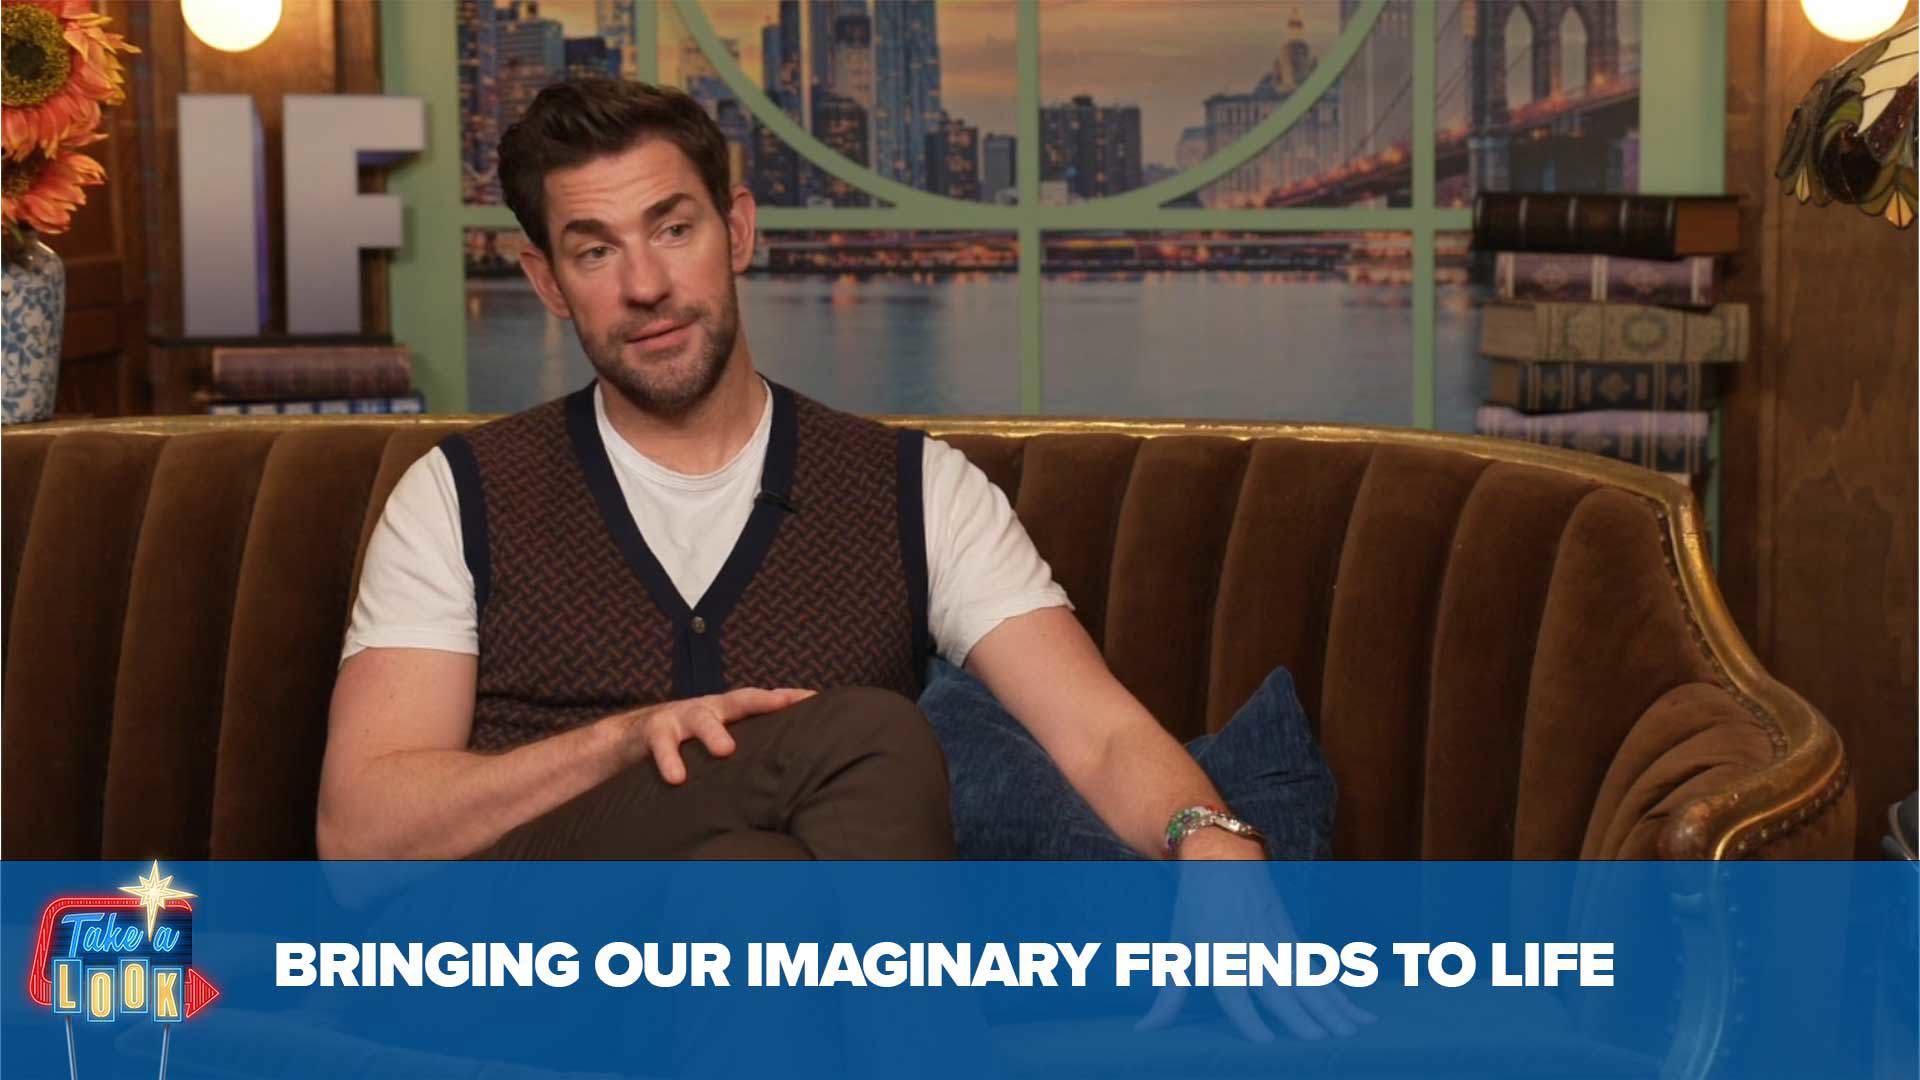 This week on “Take A Look” with Mark S. Allen:  John Krasinski brings our imaginary friends to life in "If." Plus, we take to the skies with "The Blue Angels".